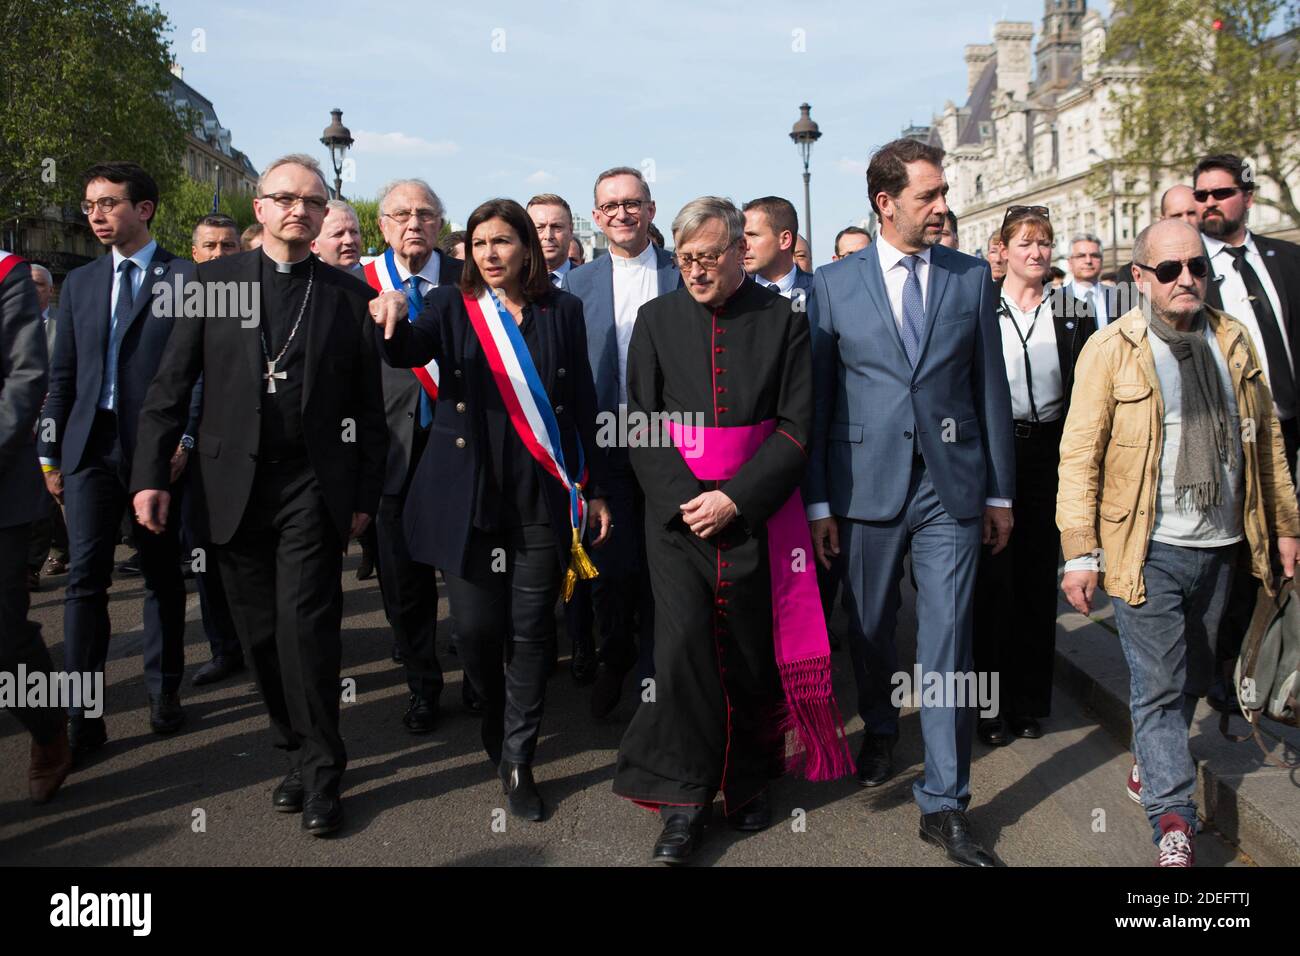 French Interior Minister Christophe Castaner (C), Notre Dame cathedral rector Jean-Marc Chauvet (2L), Paris mayor Anne Hidalgo (L), Paris prefect Didier Lallement (3R) and other officials walk to Notre Dame cathedral on April 18, 2019 in Paris. France paid a daylong tribute on April 18, 2019 to the Paris firefighters who saved Notre Dame Cathedral from collapse, while construction workers rushed to secure an area above one of the church's famed rose-shaped windows and other vulnerable sections of the fire-damaged landmark. Photo by Raphael Lafargue/ABACAPRESS.COM Stock Photo